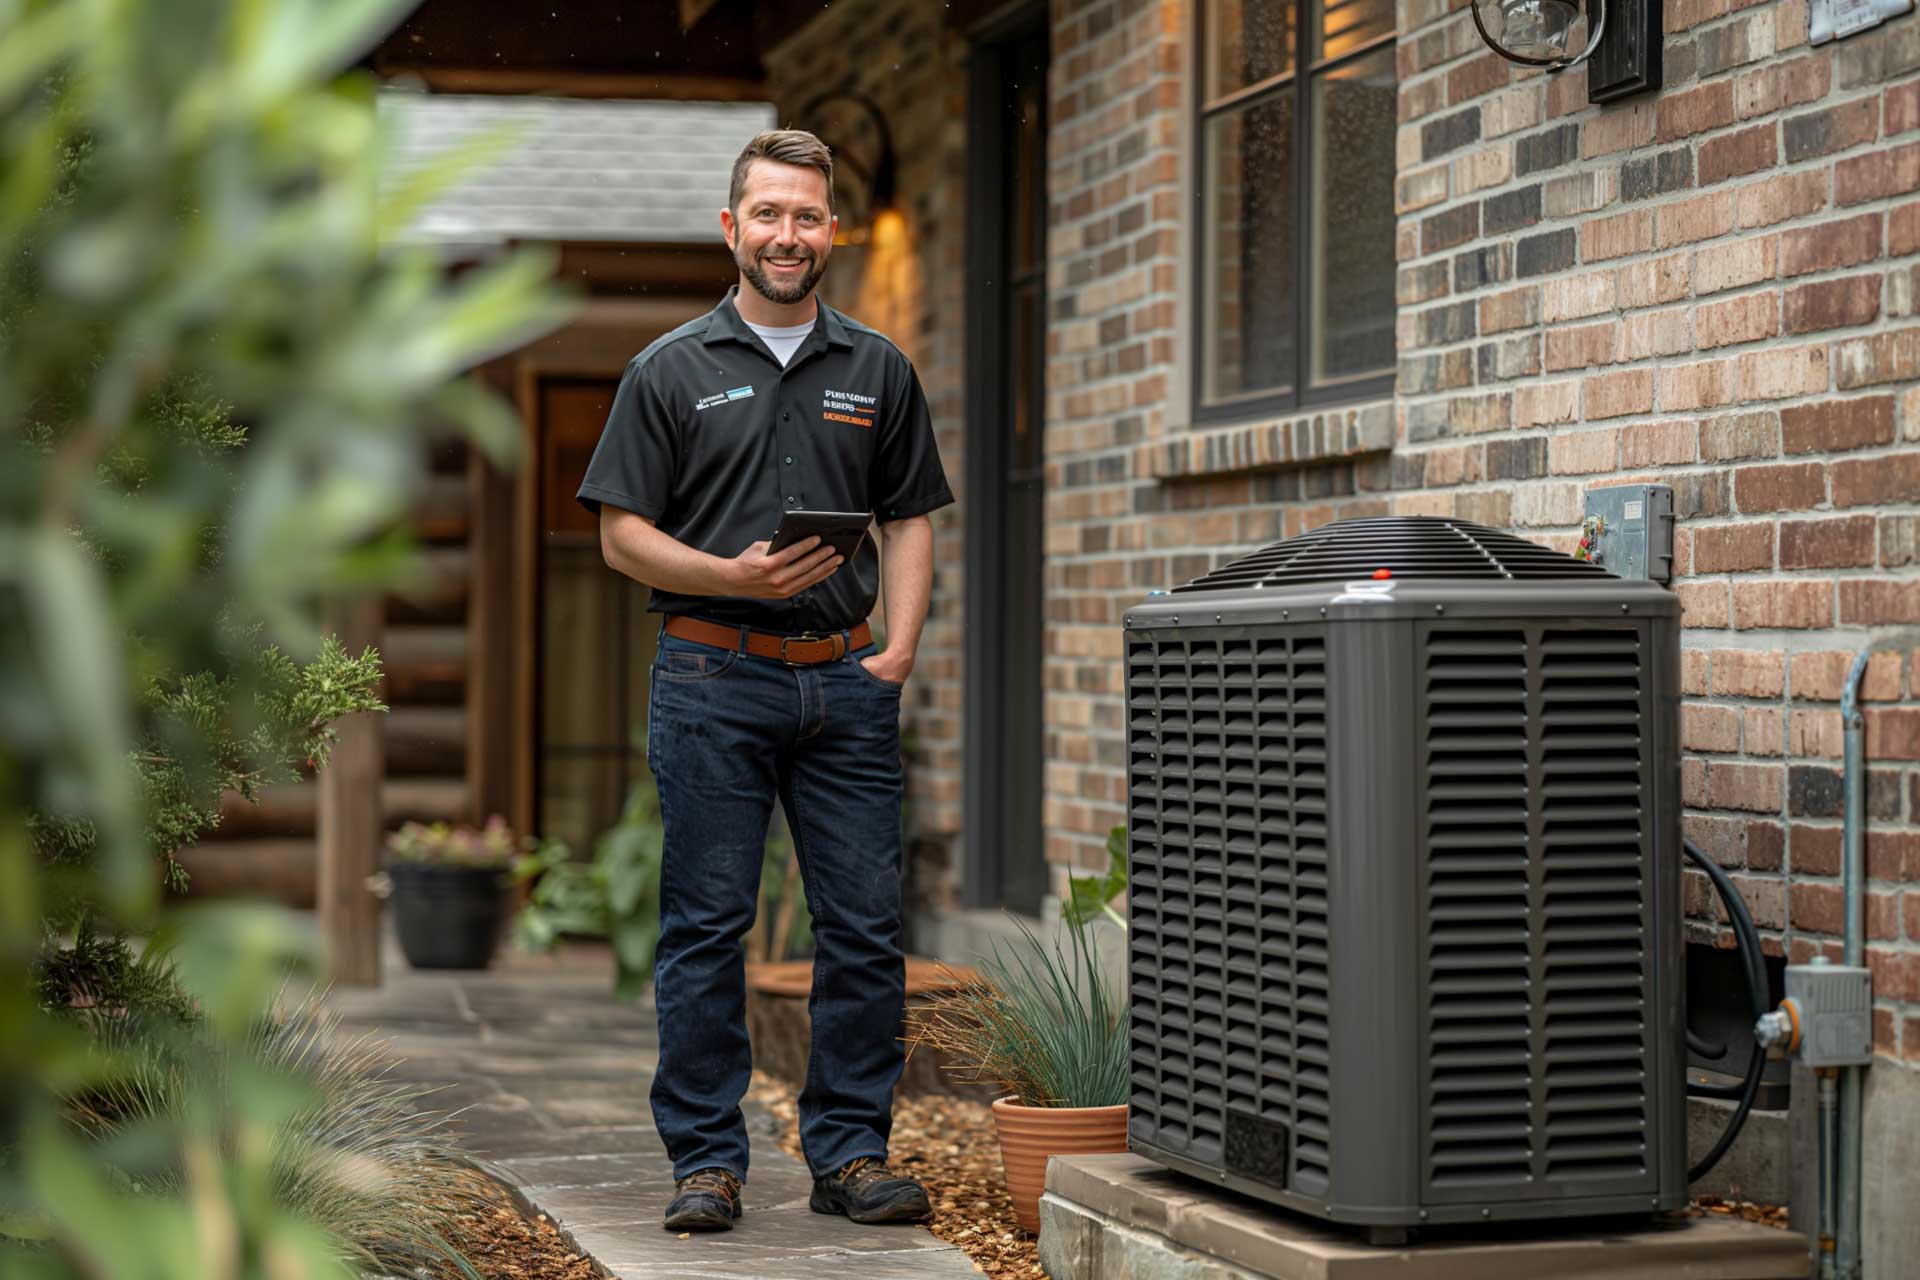 A technician smiling by a new air conditioning unit outside a brick house, holding a digital tablet.